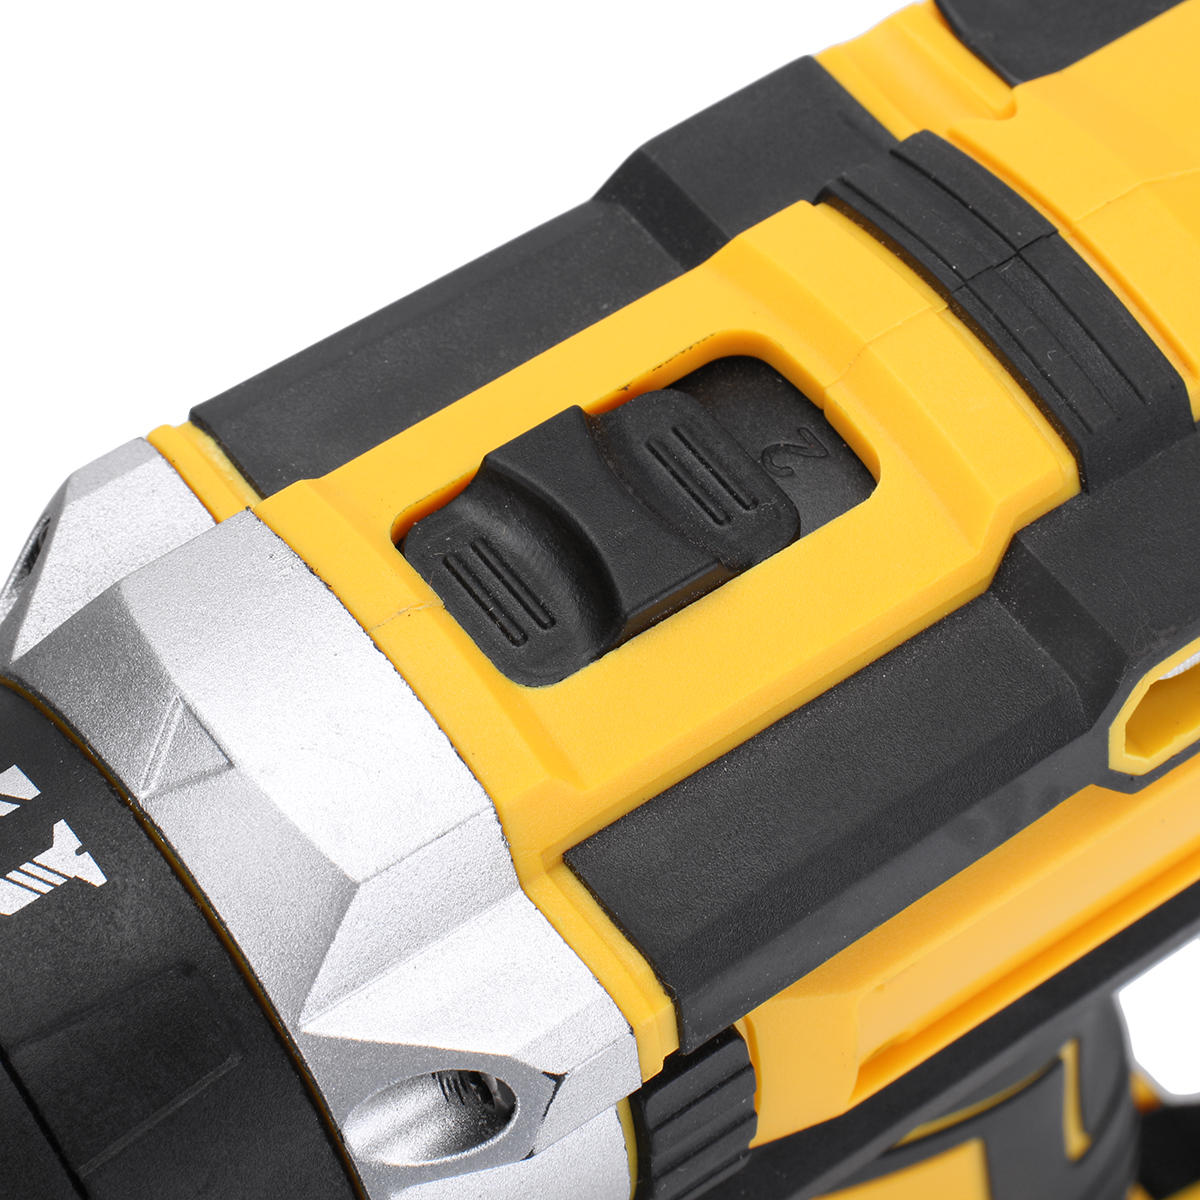 3-IN-1-Electric-Cordless-Impact-Hammer-Drill-Screwdriver-38Nm-High-Torque-Tool-1780452-10